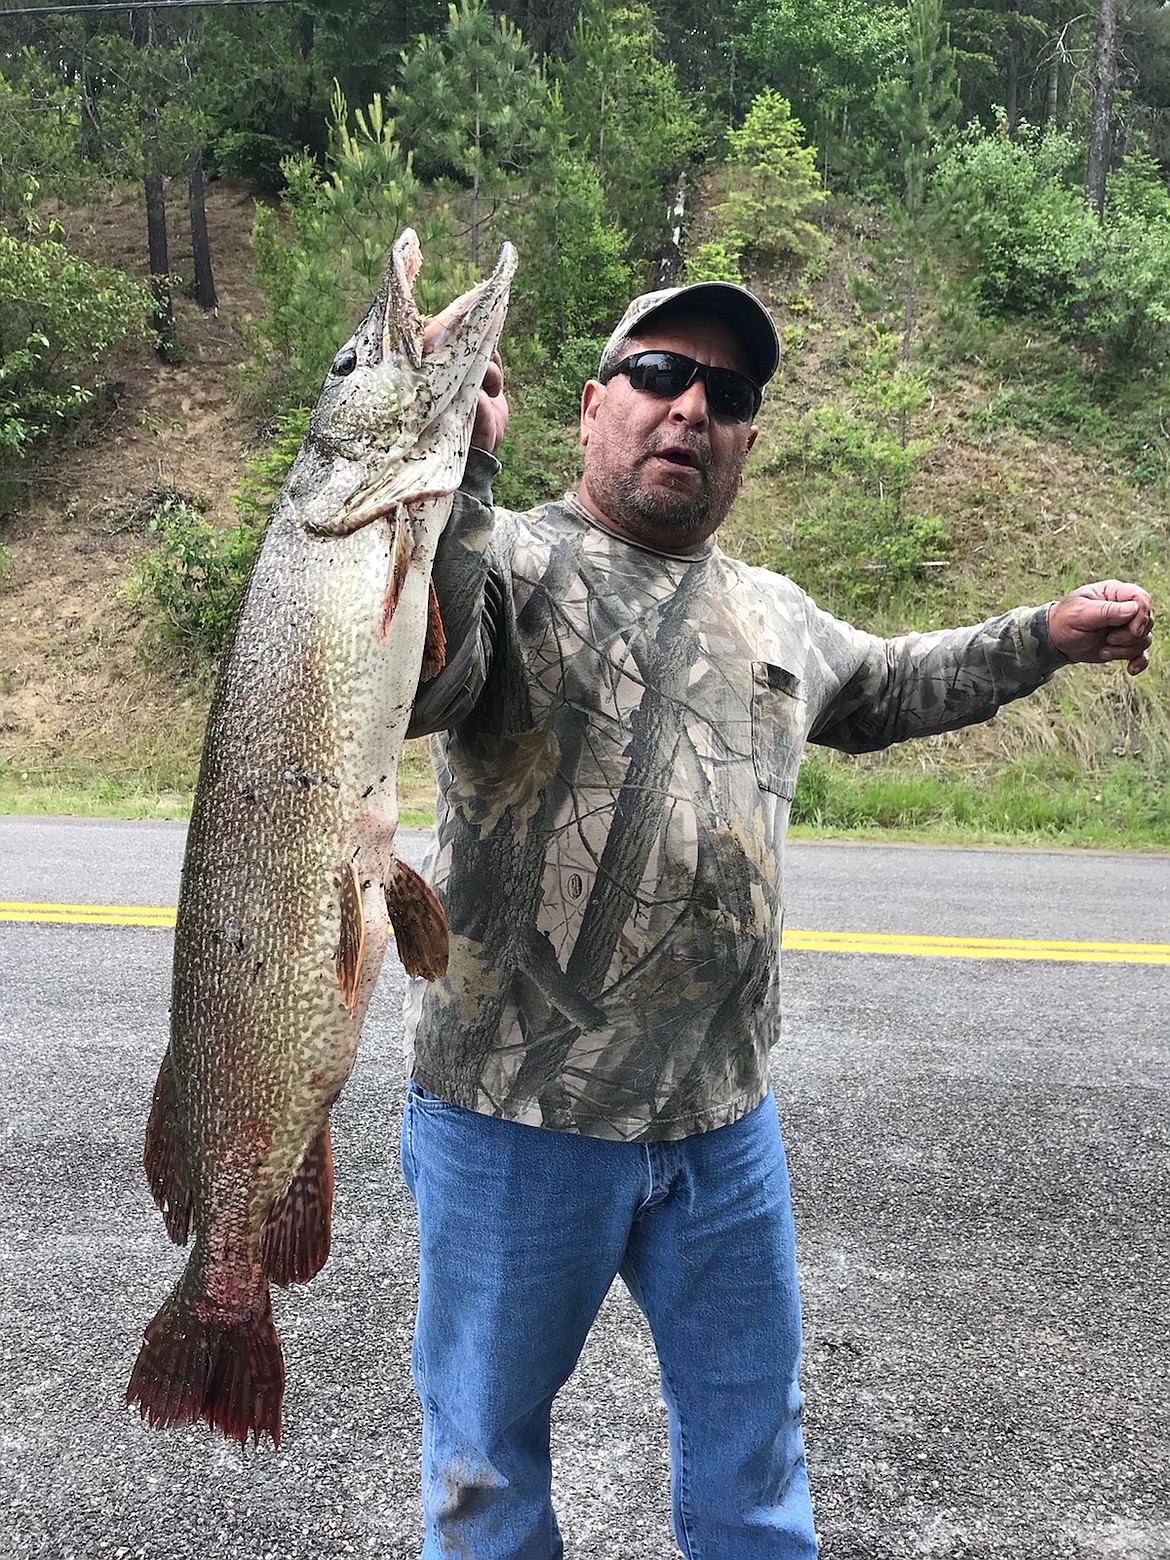 Casual cast nets 25- pound pike for Hayden man fishing from shore